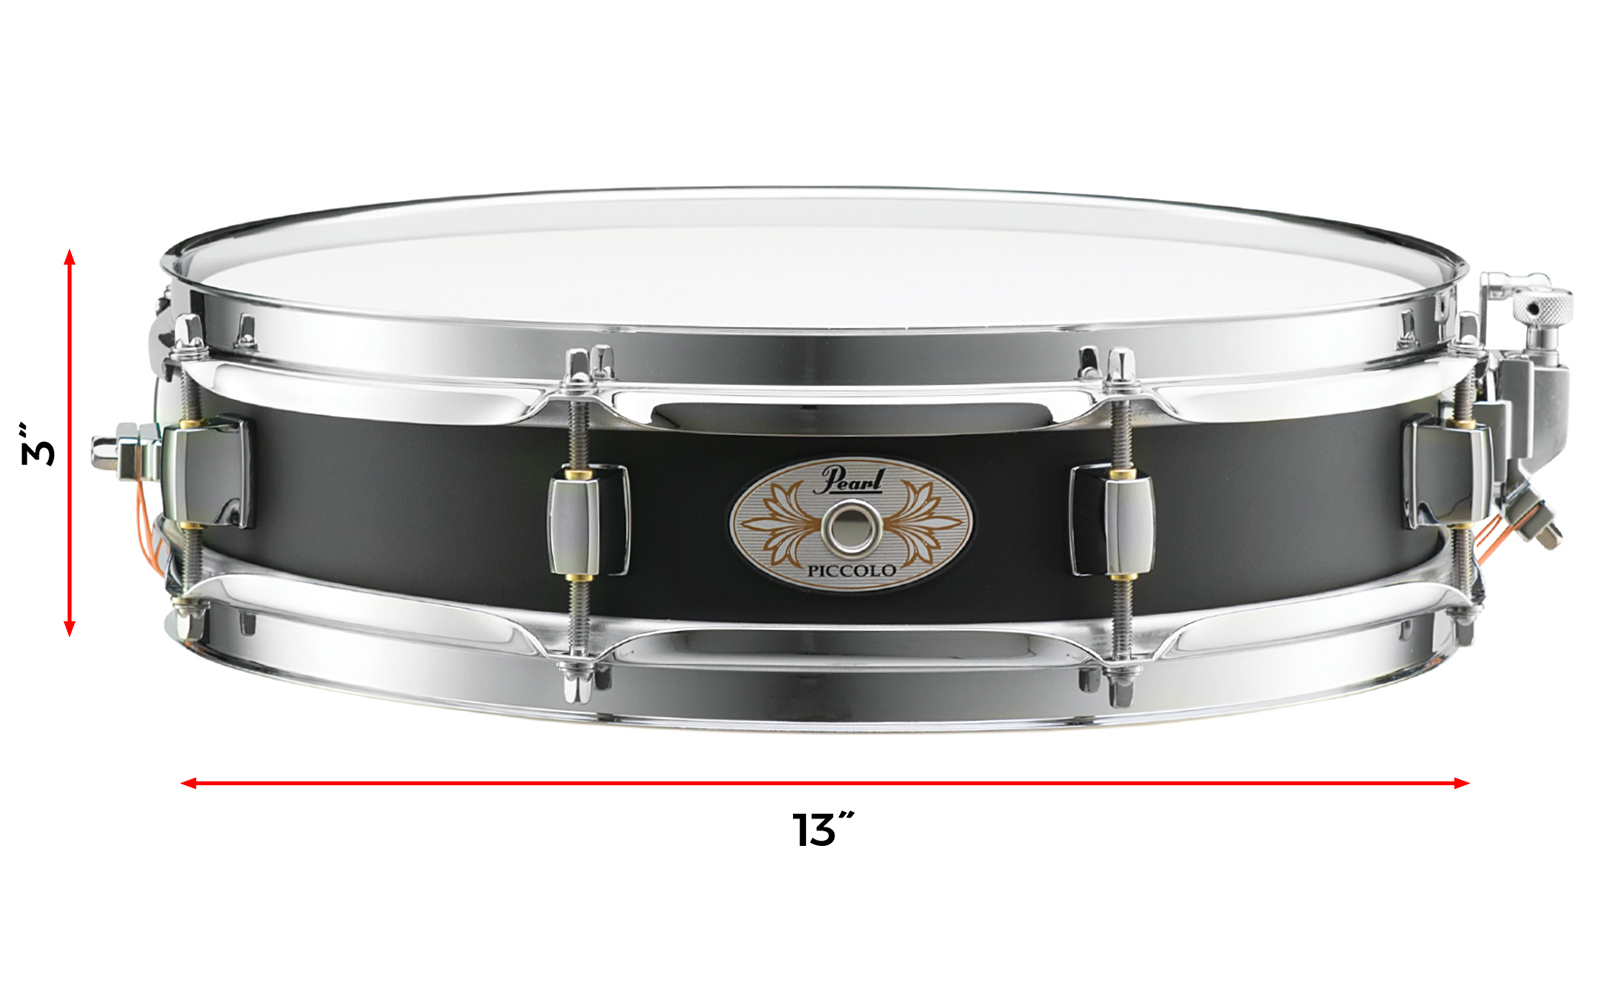 13x3 Steel Effect Piccolo Snare | パール楽器【公式サイト】Pearl Drums